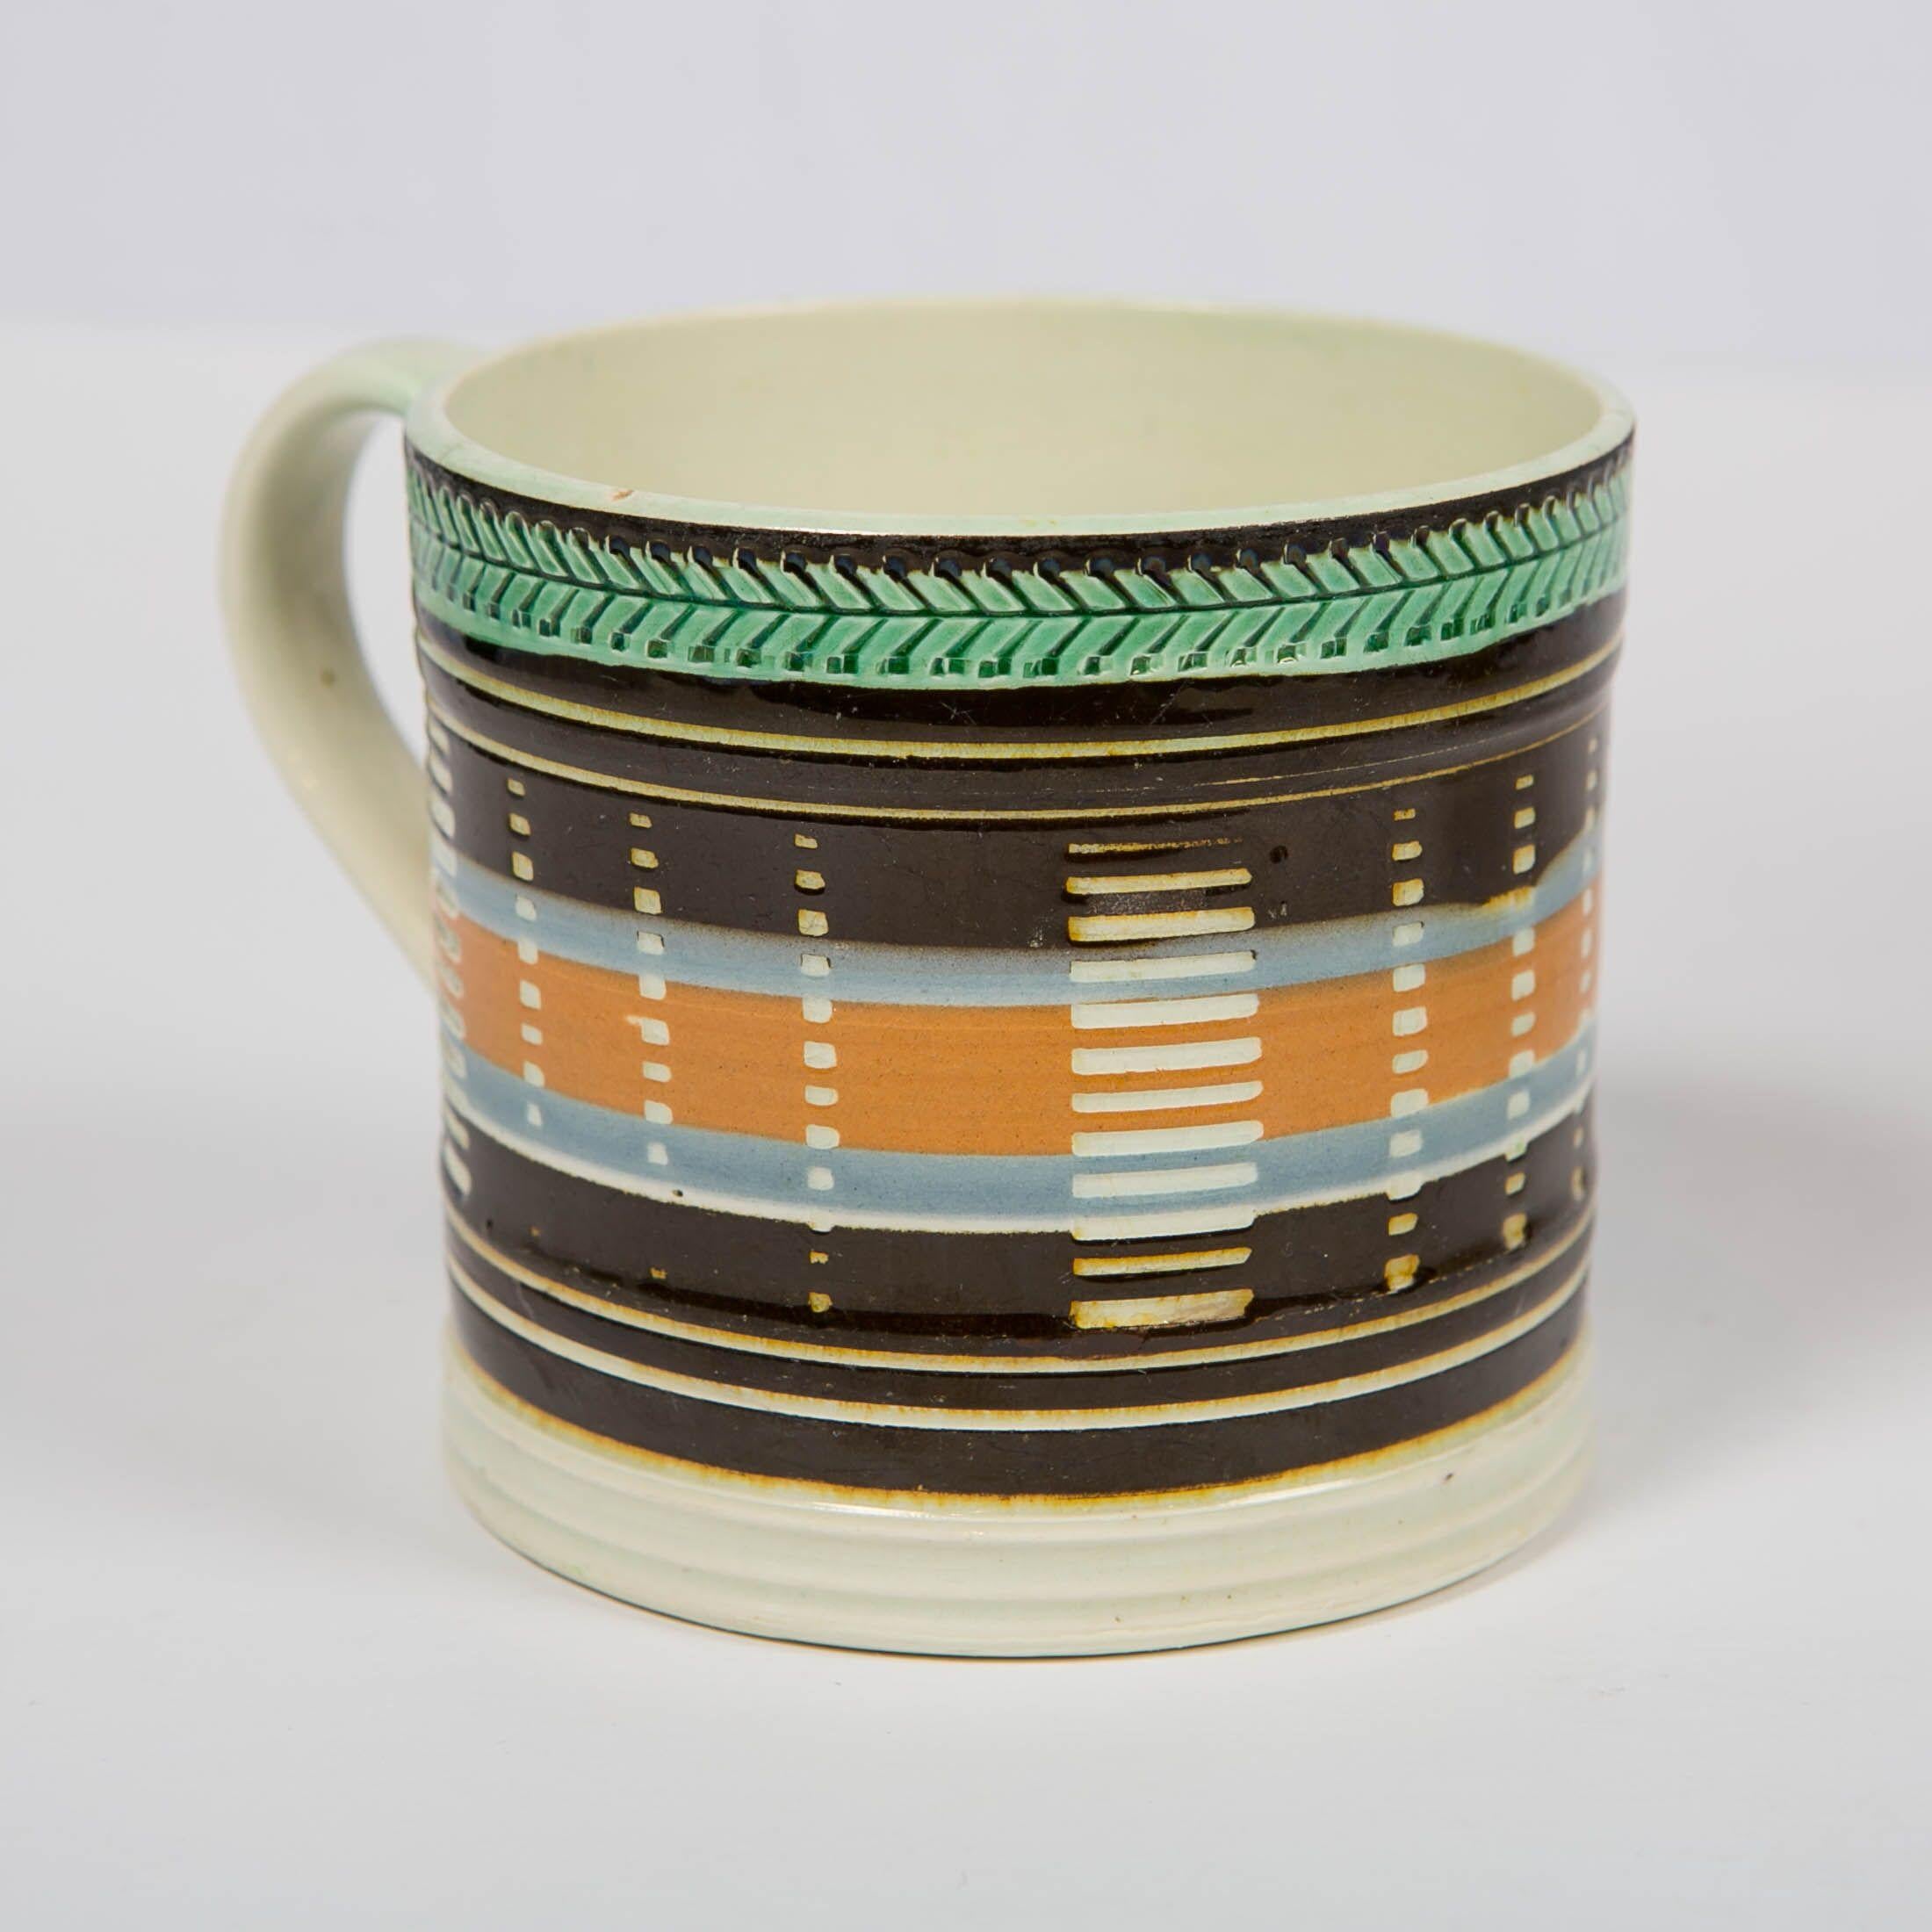 A mochaware mug made in England, circa 1820. The mug is made of pearl-glazed creamware. The decoration has dramatic black, light blue, and orange bands of slip, which are cut through in 